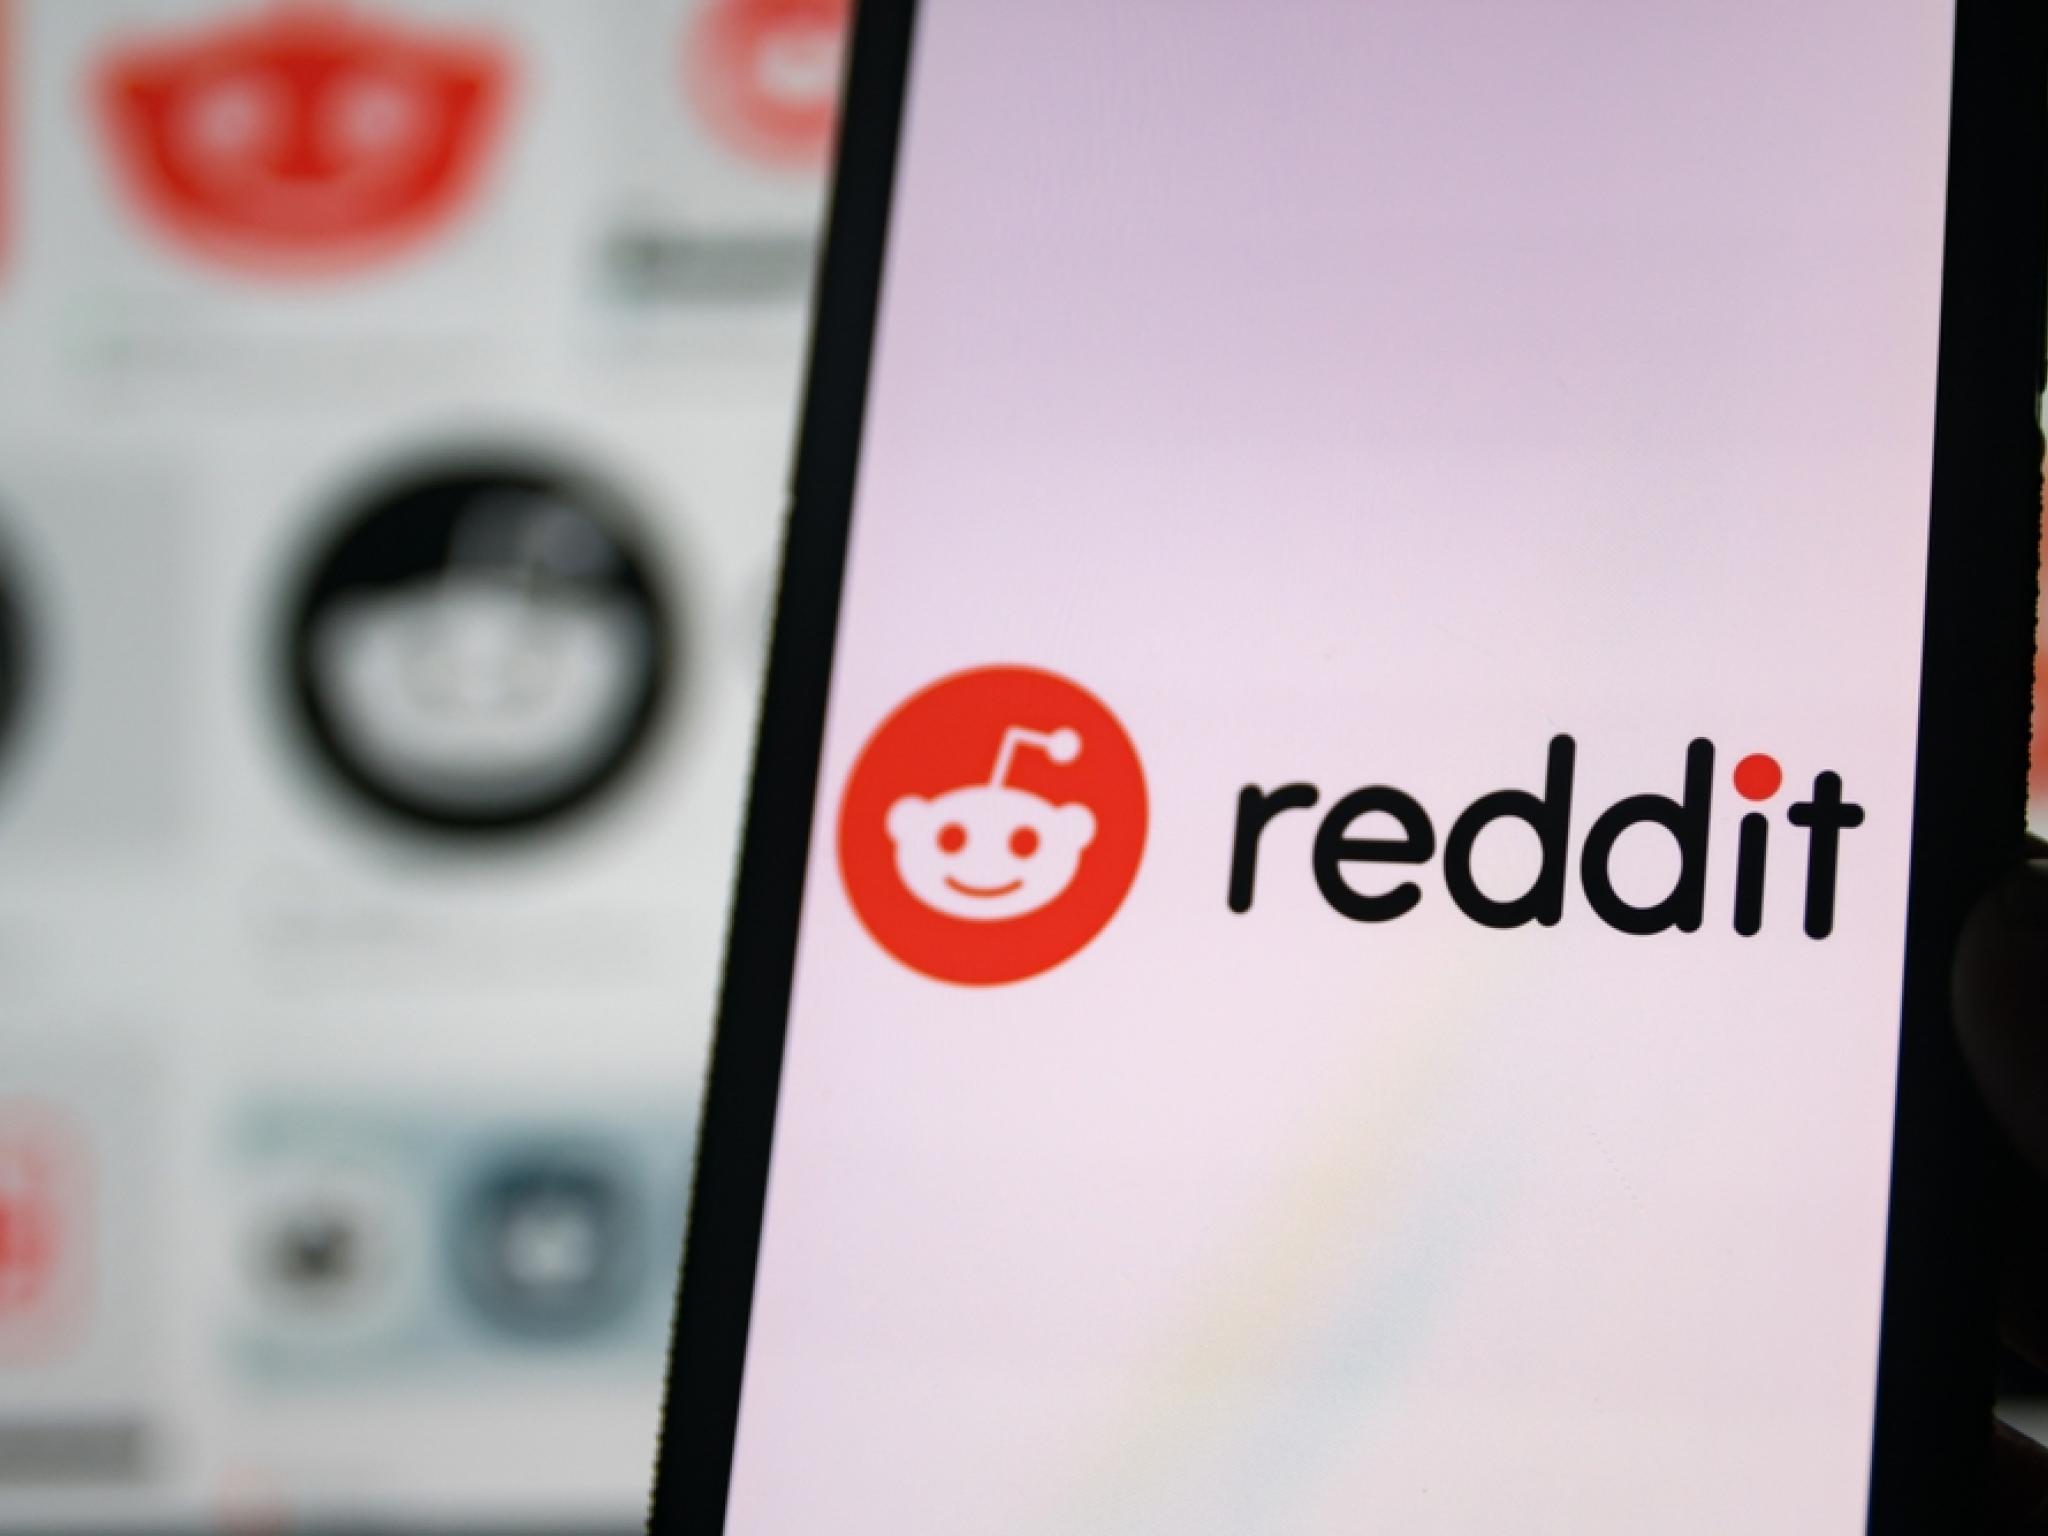 a-few-lucky-people-can-get-reddit-ipo-shares-heres-how